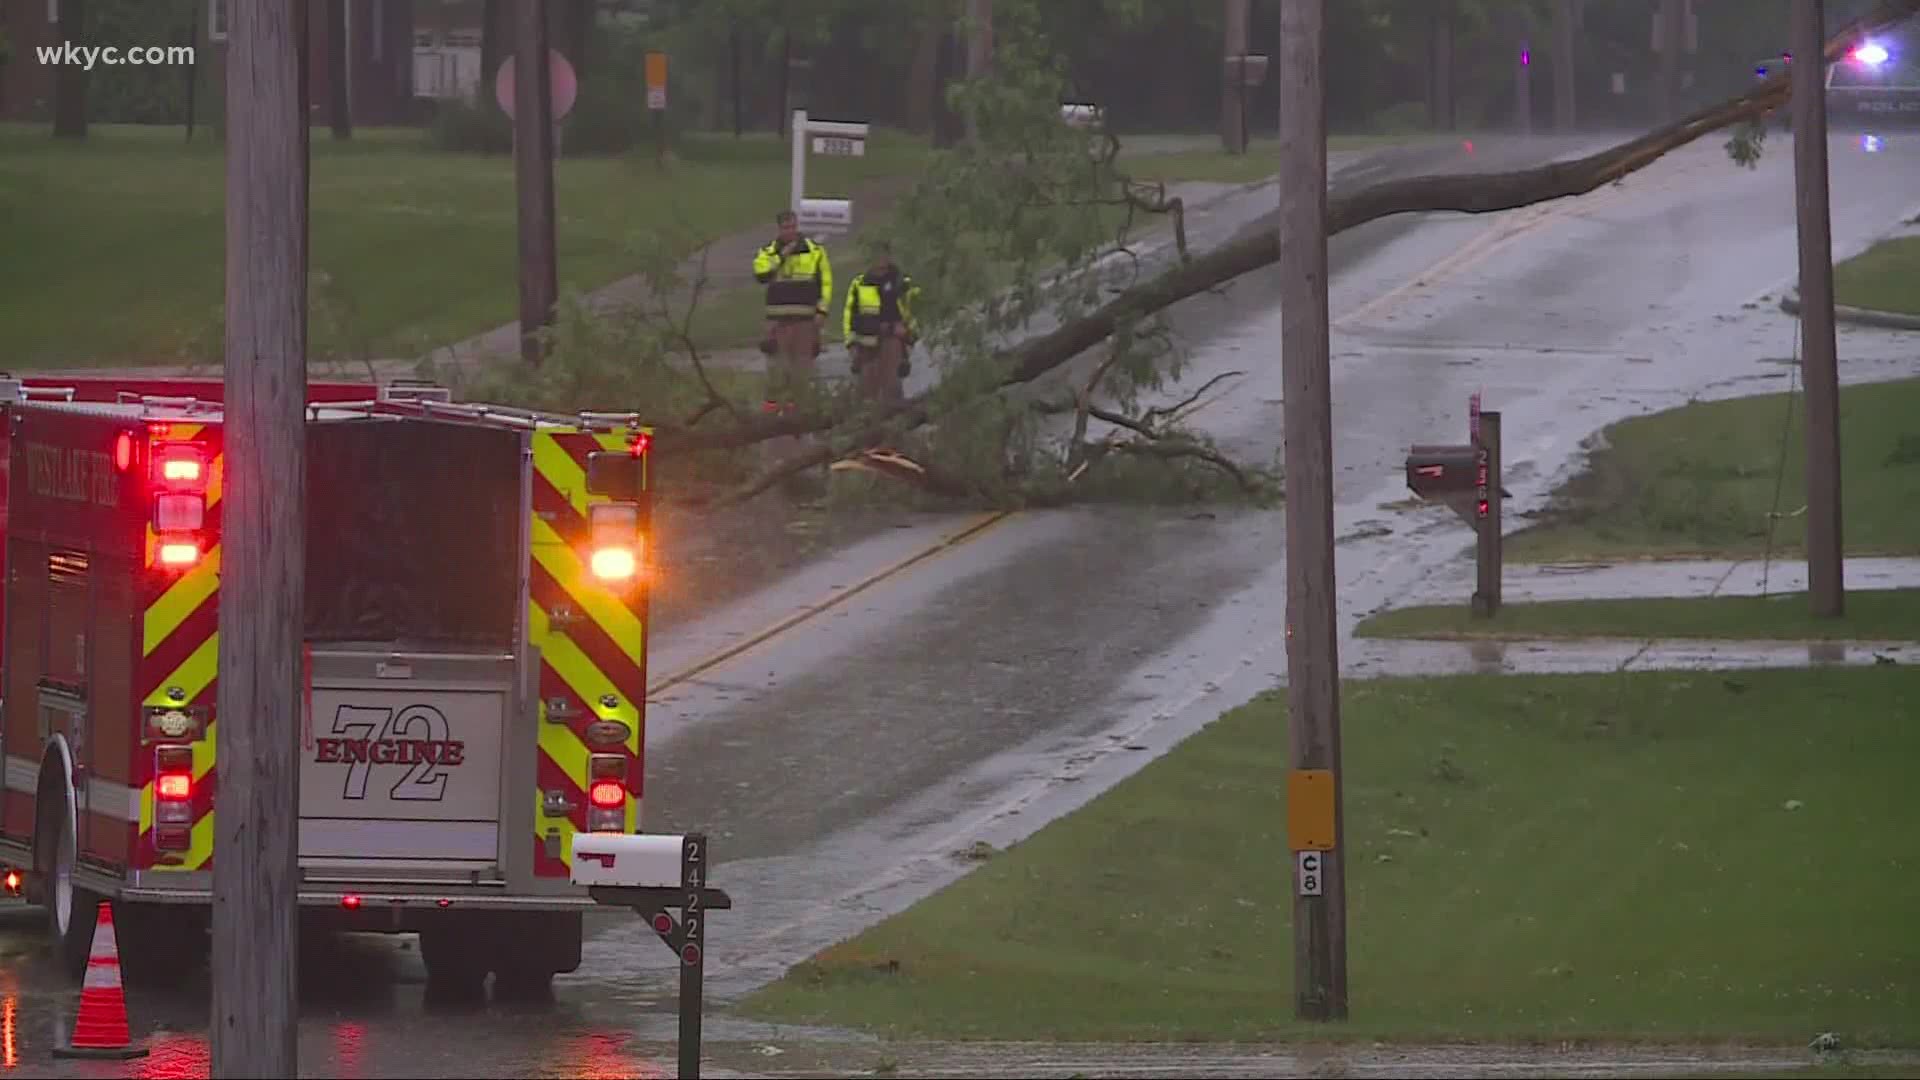 June 11, 2020: Here's a closer look at some of the damage throughout Northeast Ohio after strong storms battered the region last night.